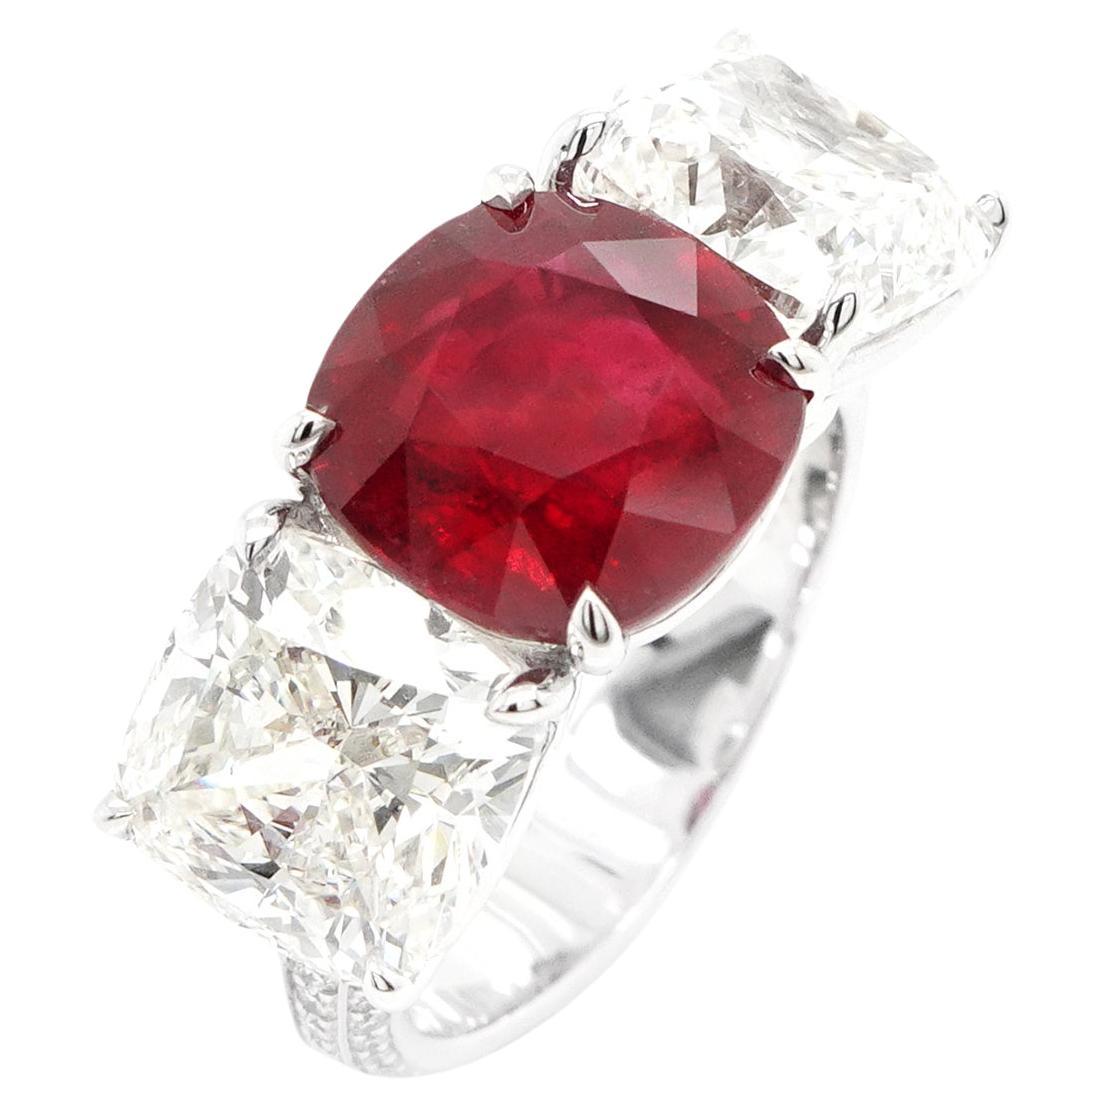 BENJAMIN FINE JEWELRY 5.62 cts Unheated Ruby with Diamond 18K Ring For Sale